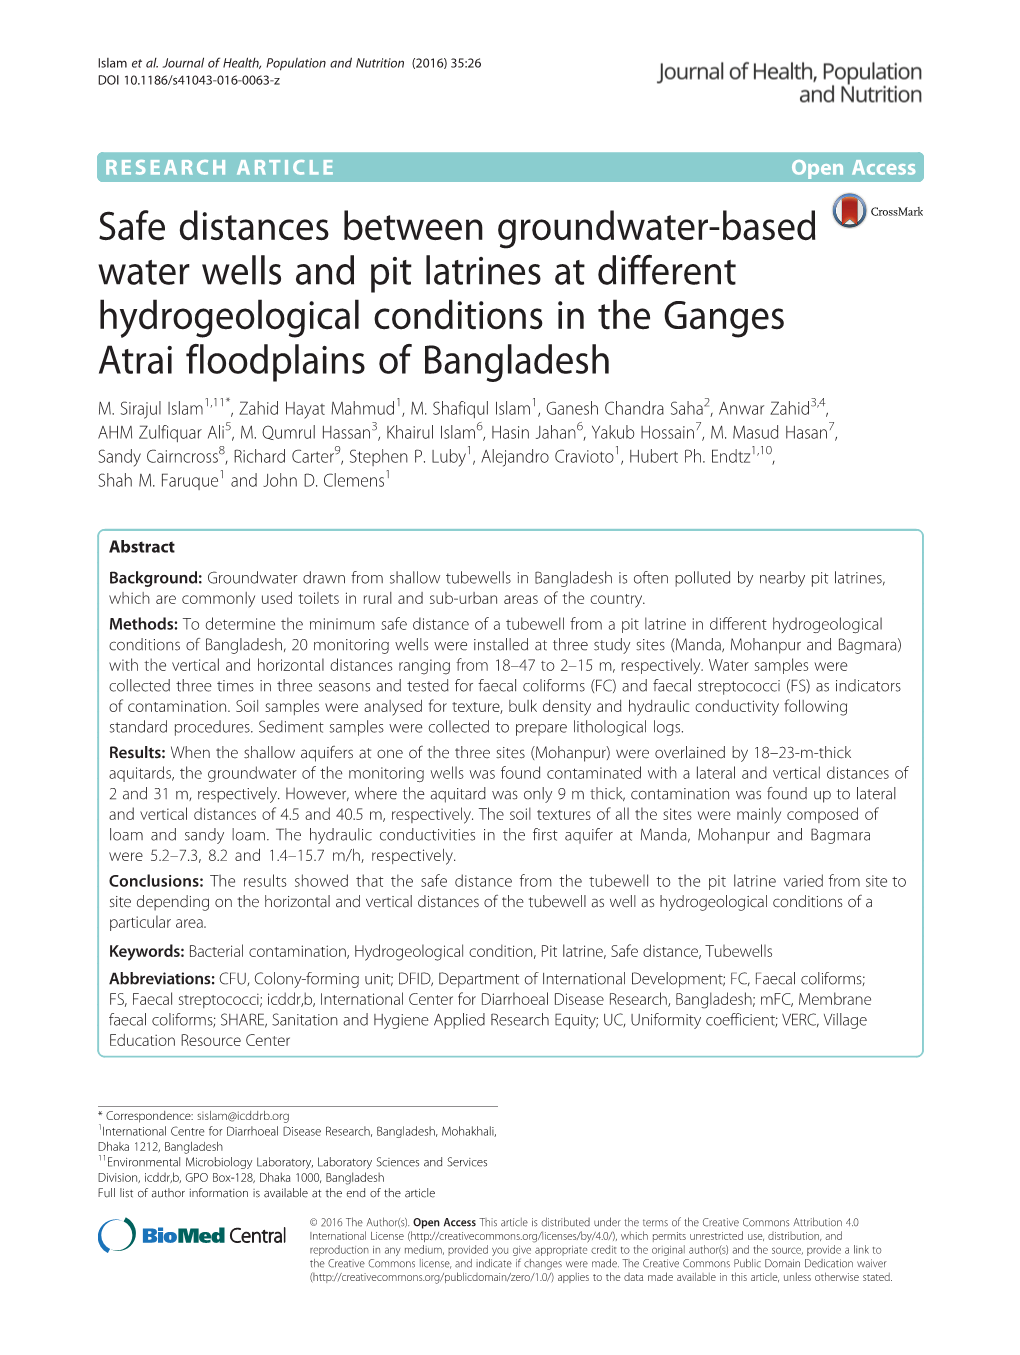 Safe Distances Between Groundwater-Based Water Wells and Pit Latrines at Different Hydrogeological Conditions in the Ganges Atrai Floodplains of Bangladesh M